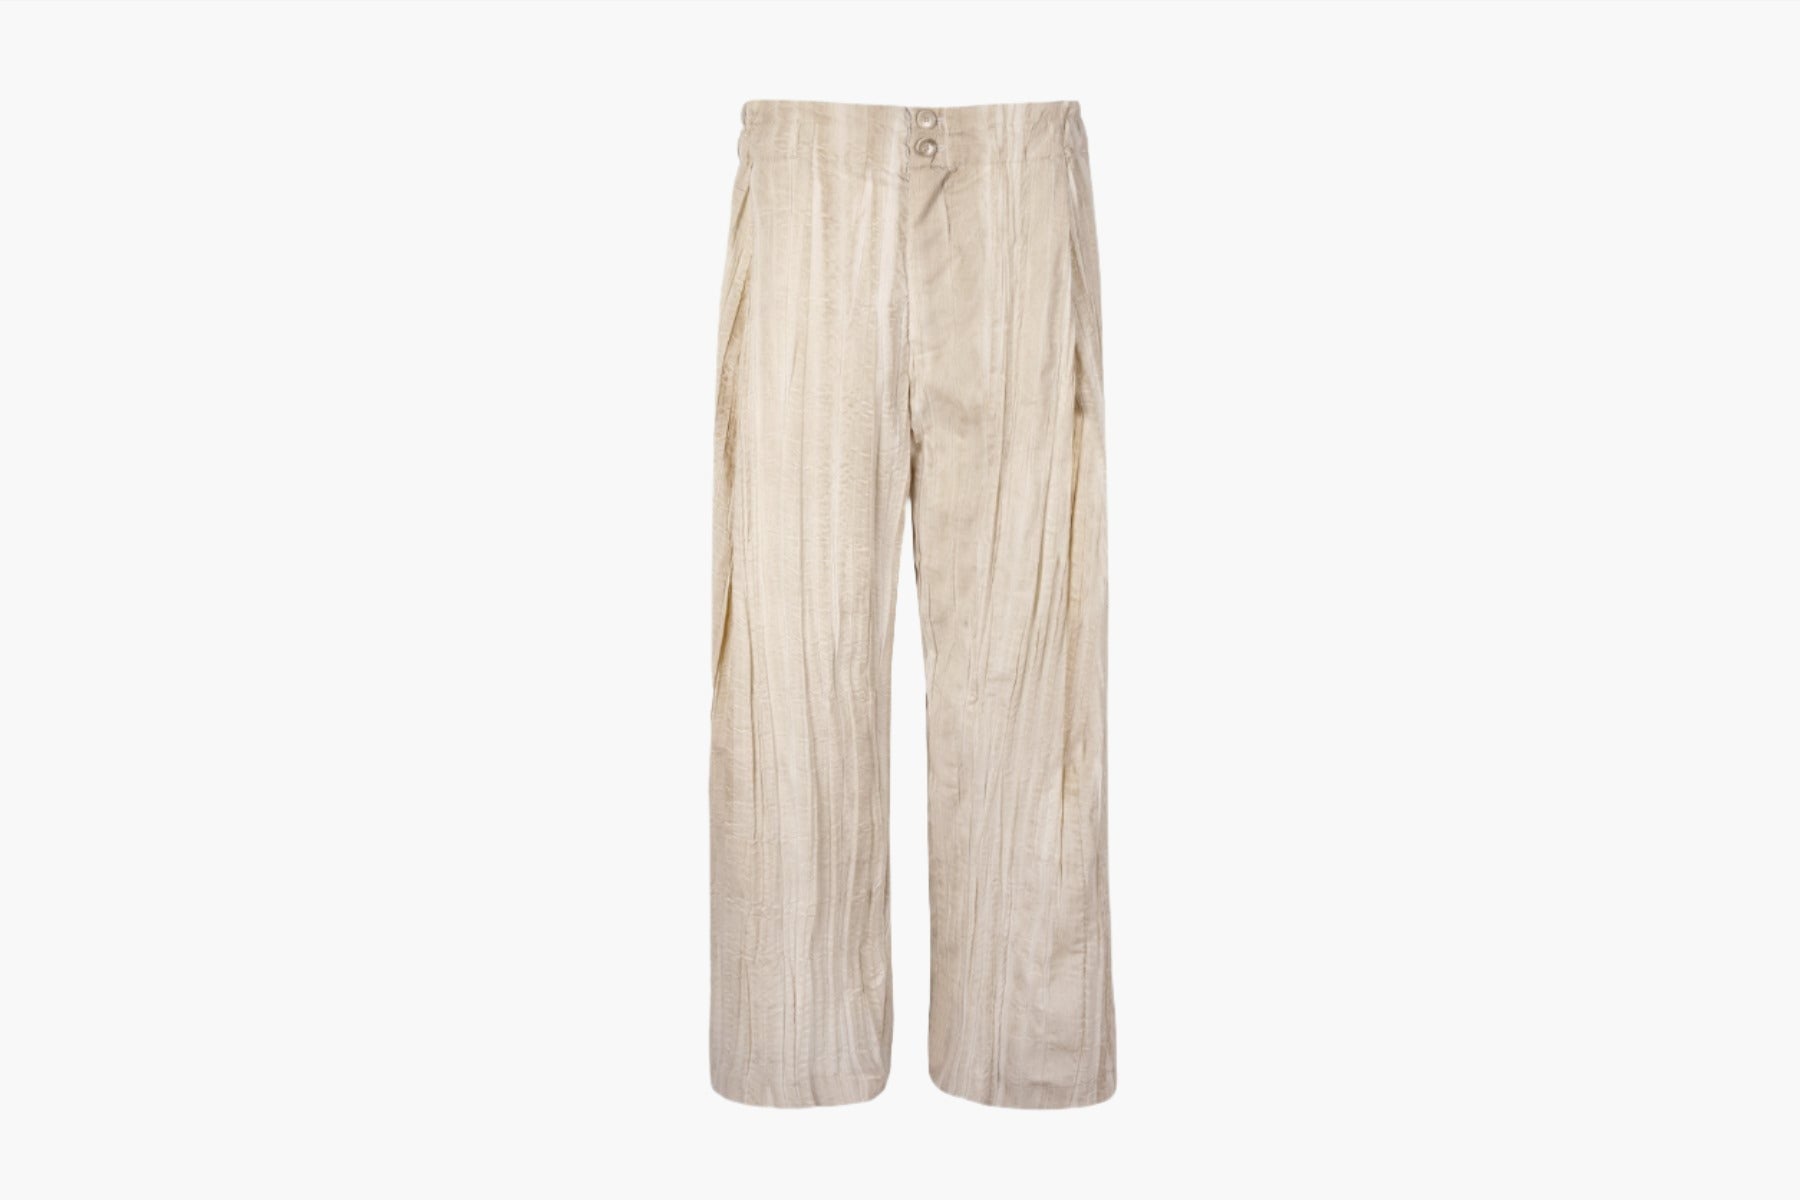 ROSEN Planck Trousers in Pleated Cotton